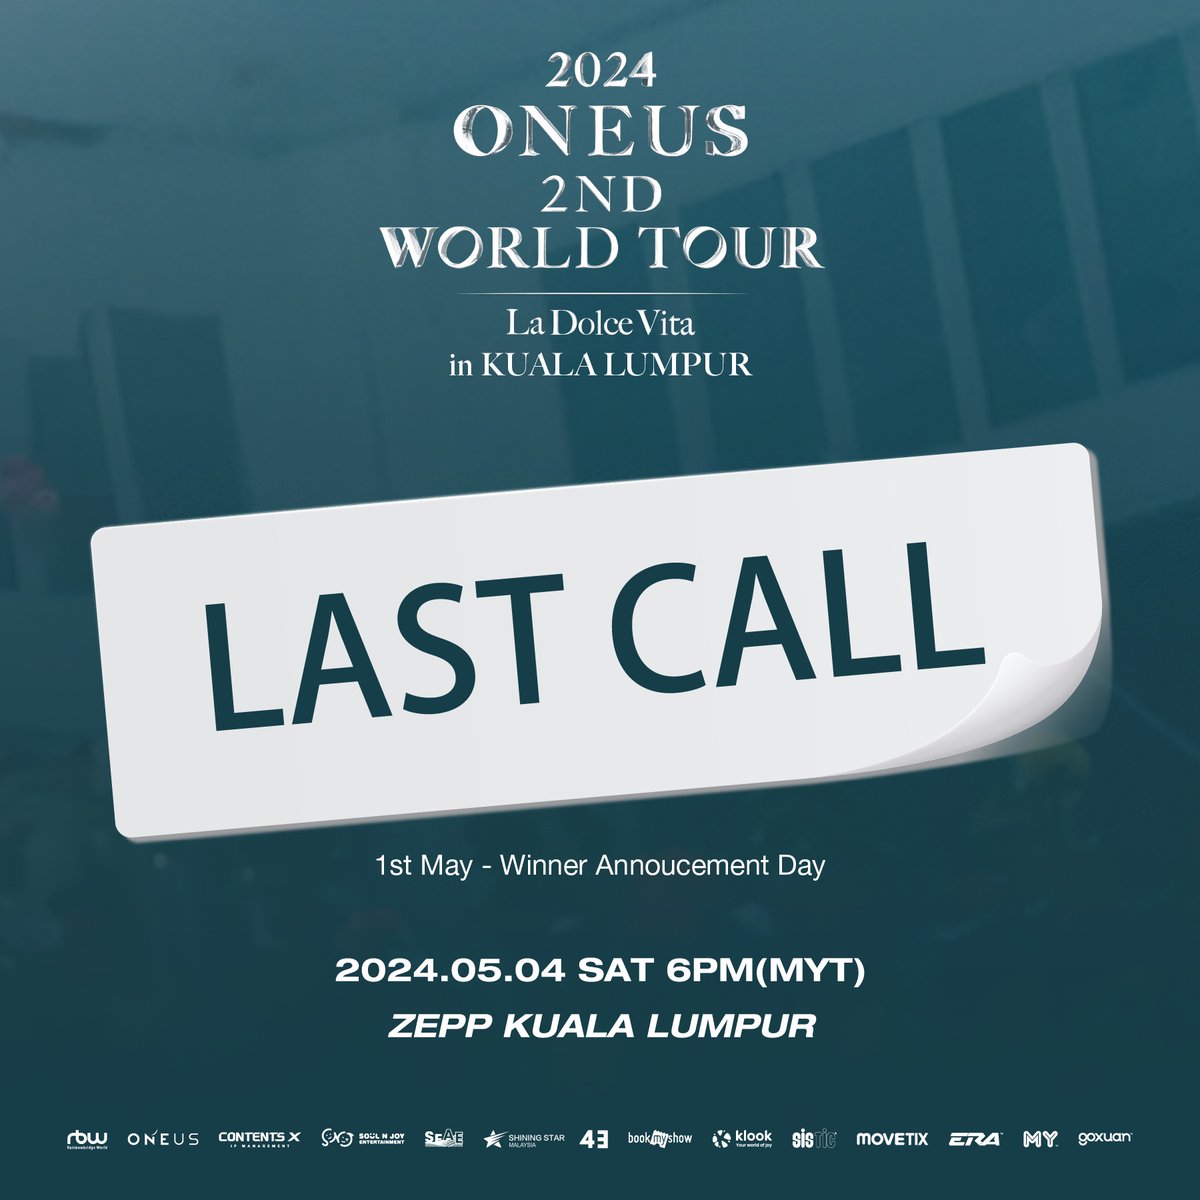 Grab the final chance! Purchase the tickets before 1st May for a chance to win fan benefits! 🗓 Date: May 4, 2024 (SAT) ⏰ Time: 6pm 📍 Venue: ZEPP KUALA LUMPUR | Malaysia #ONEUS #La_Dolce_Vita #ONEUS2ND #ONEUSinMY #ONEUSMALAYSIA